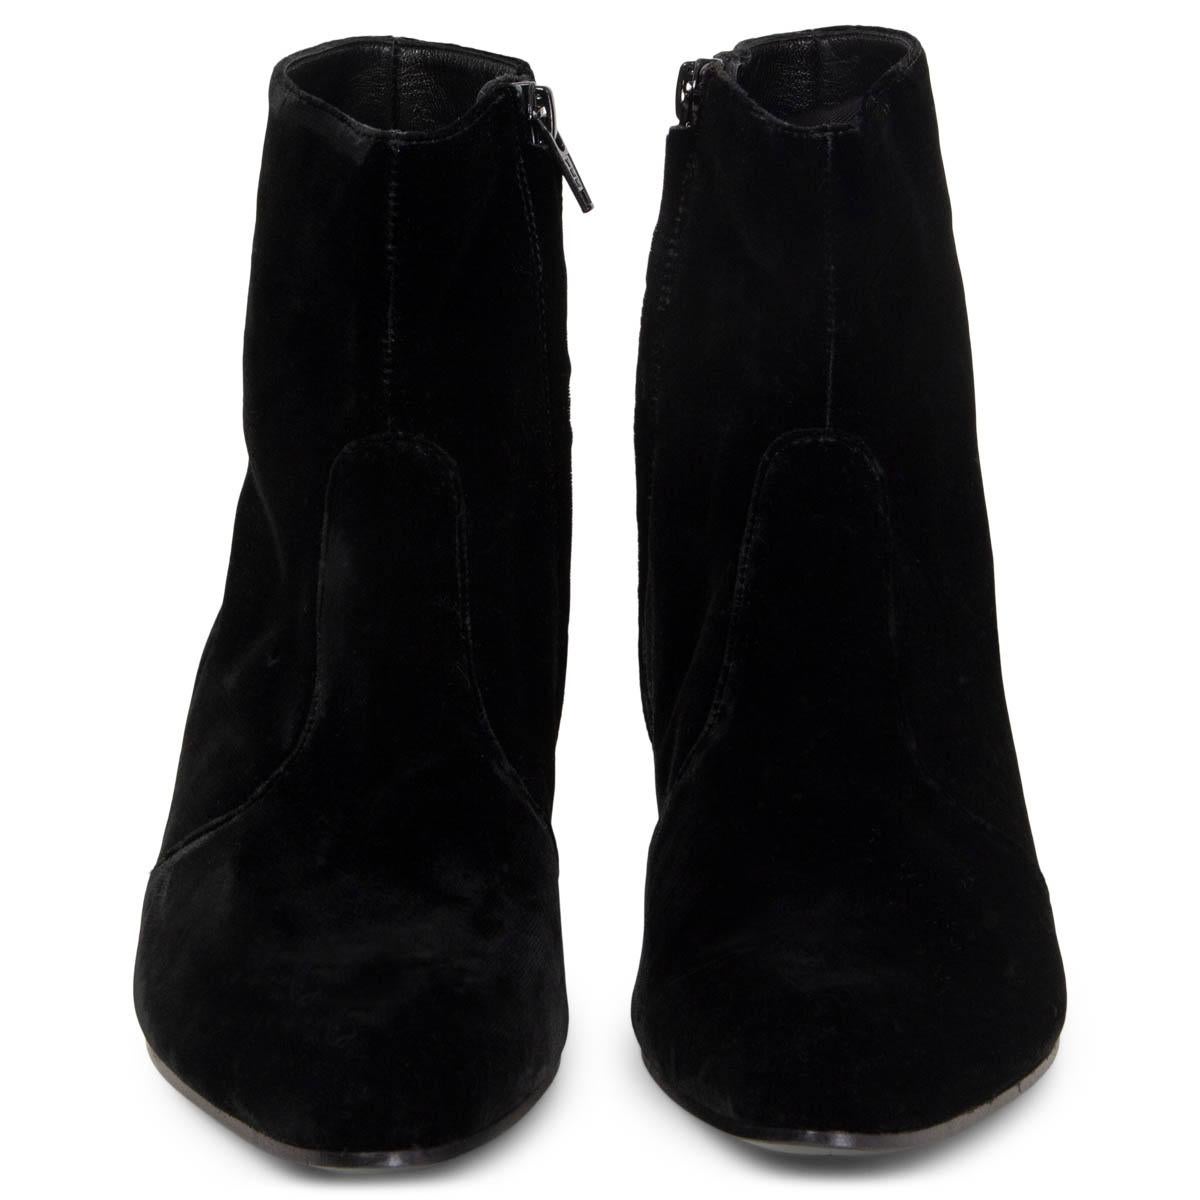 100% authentic Saint Laurent Wyatt Zip pointed-toe ankle-boots in black velvet. Open with a zipper on the inside. Have been worn once inside and are in virtually new condition. 

Measurements
Imprinted Size	37
Shoe Size	37
Inside Sole	24cm